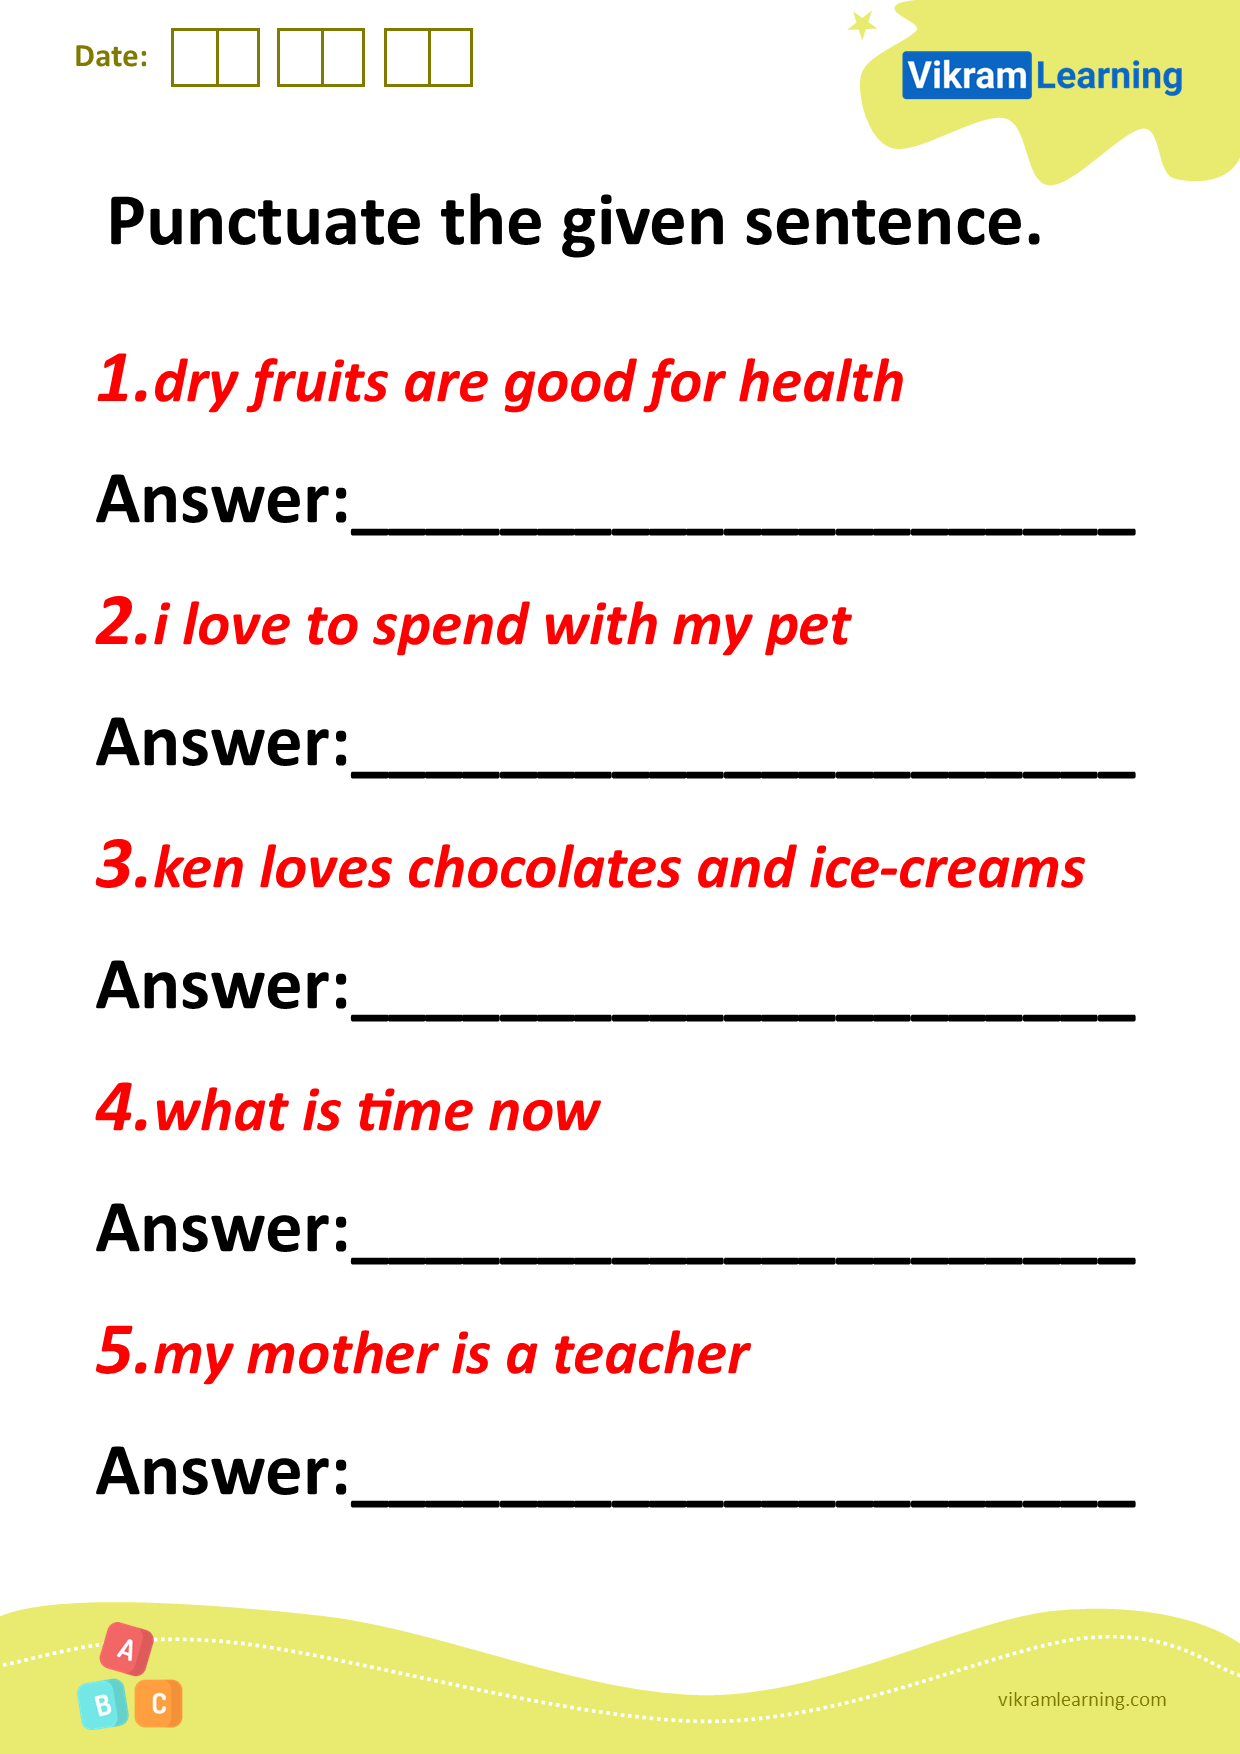 Download punctuate the given sentence worksheets